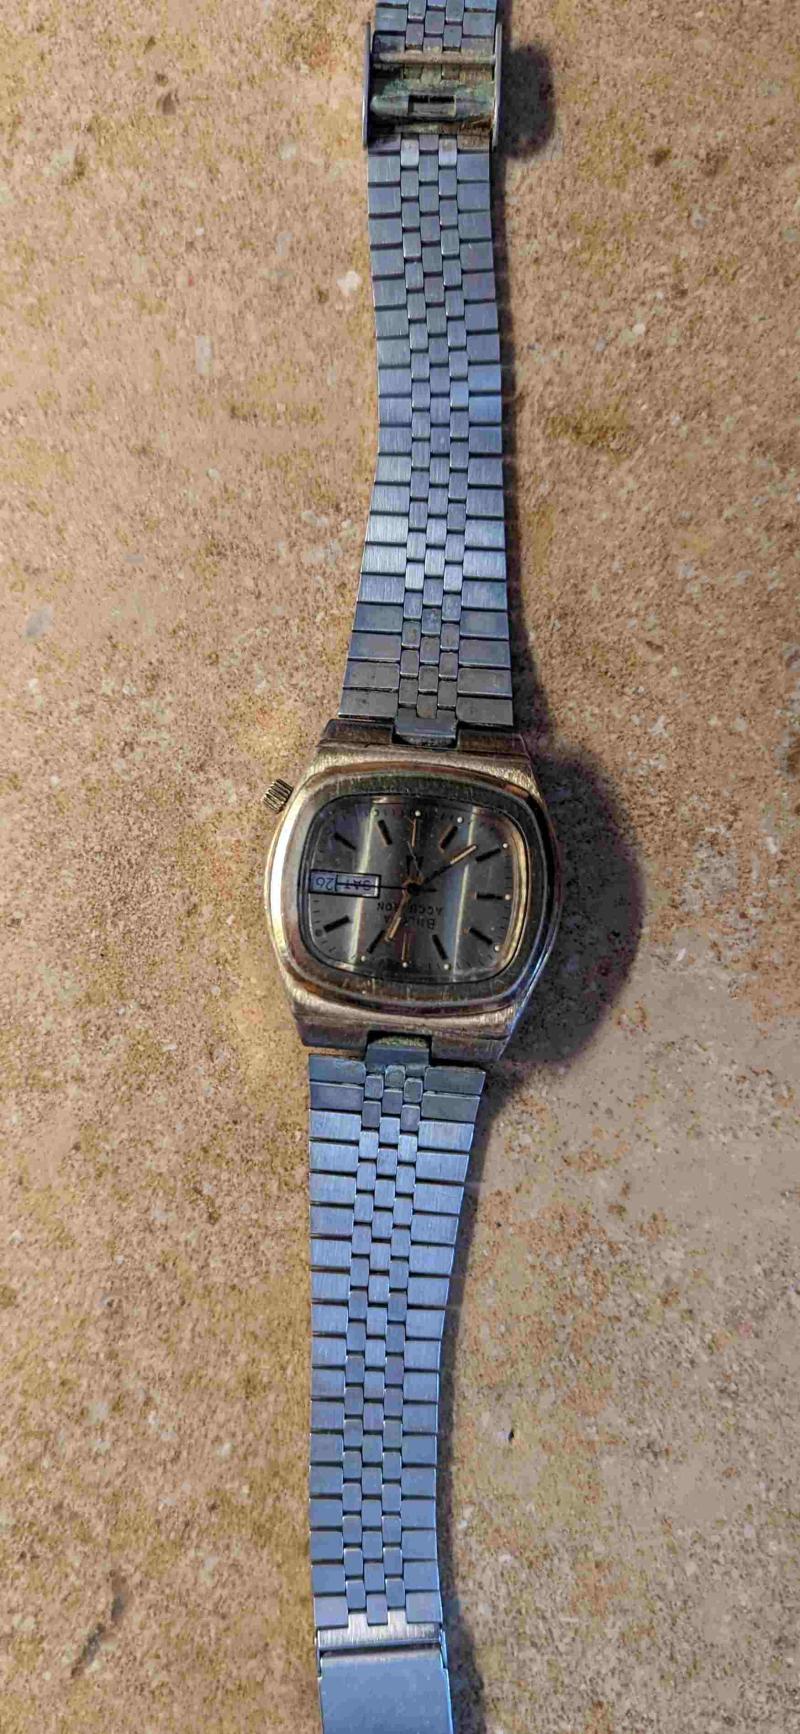 Gold, square-faced watch with Bulova Accutron text, tuning fork symbol, and date/day window